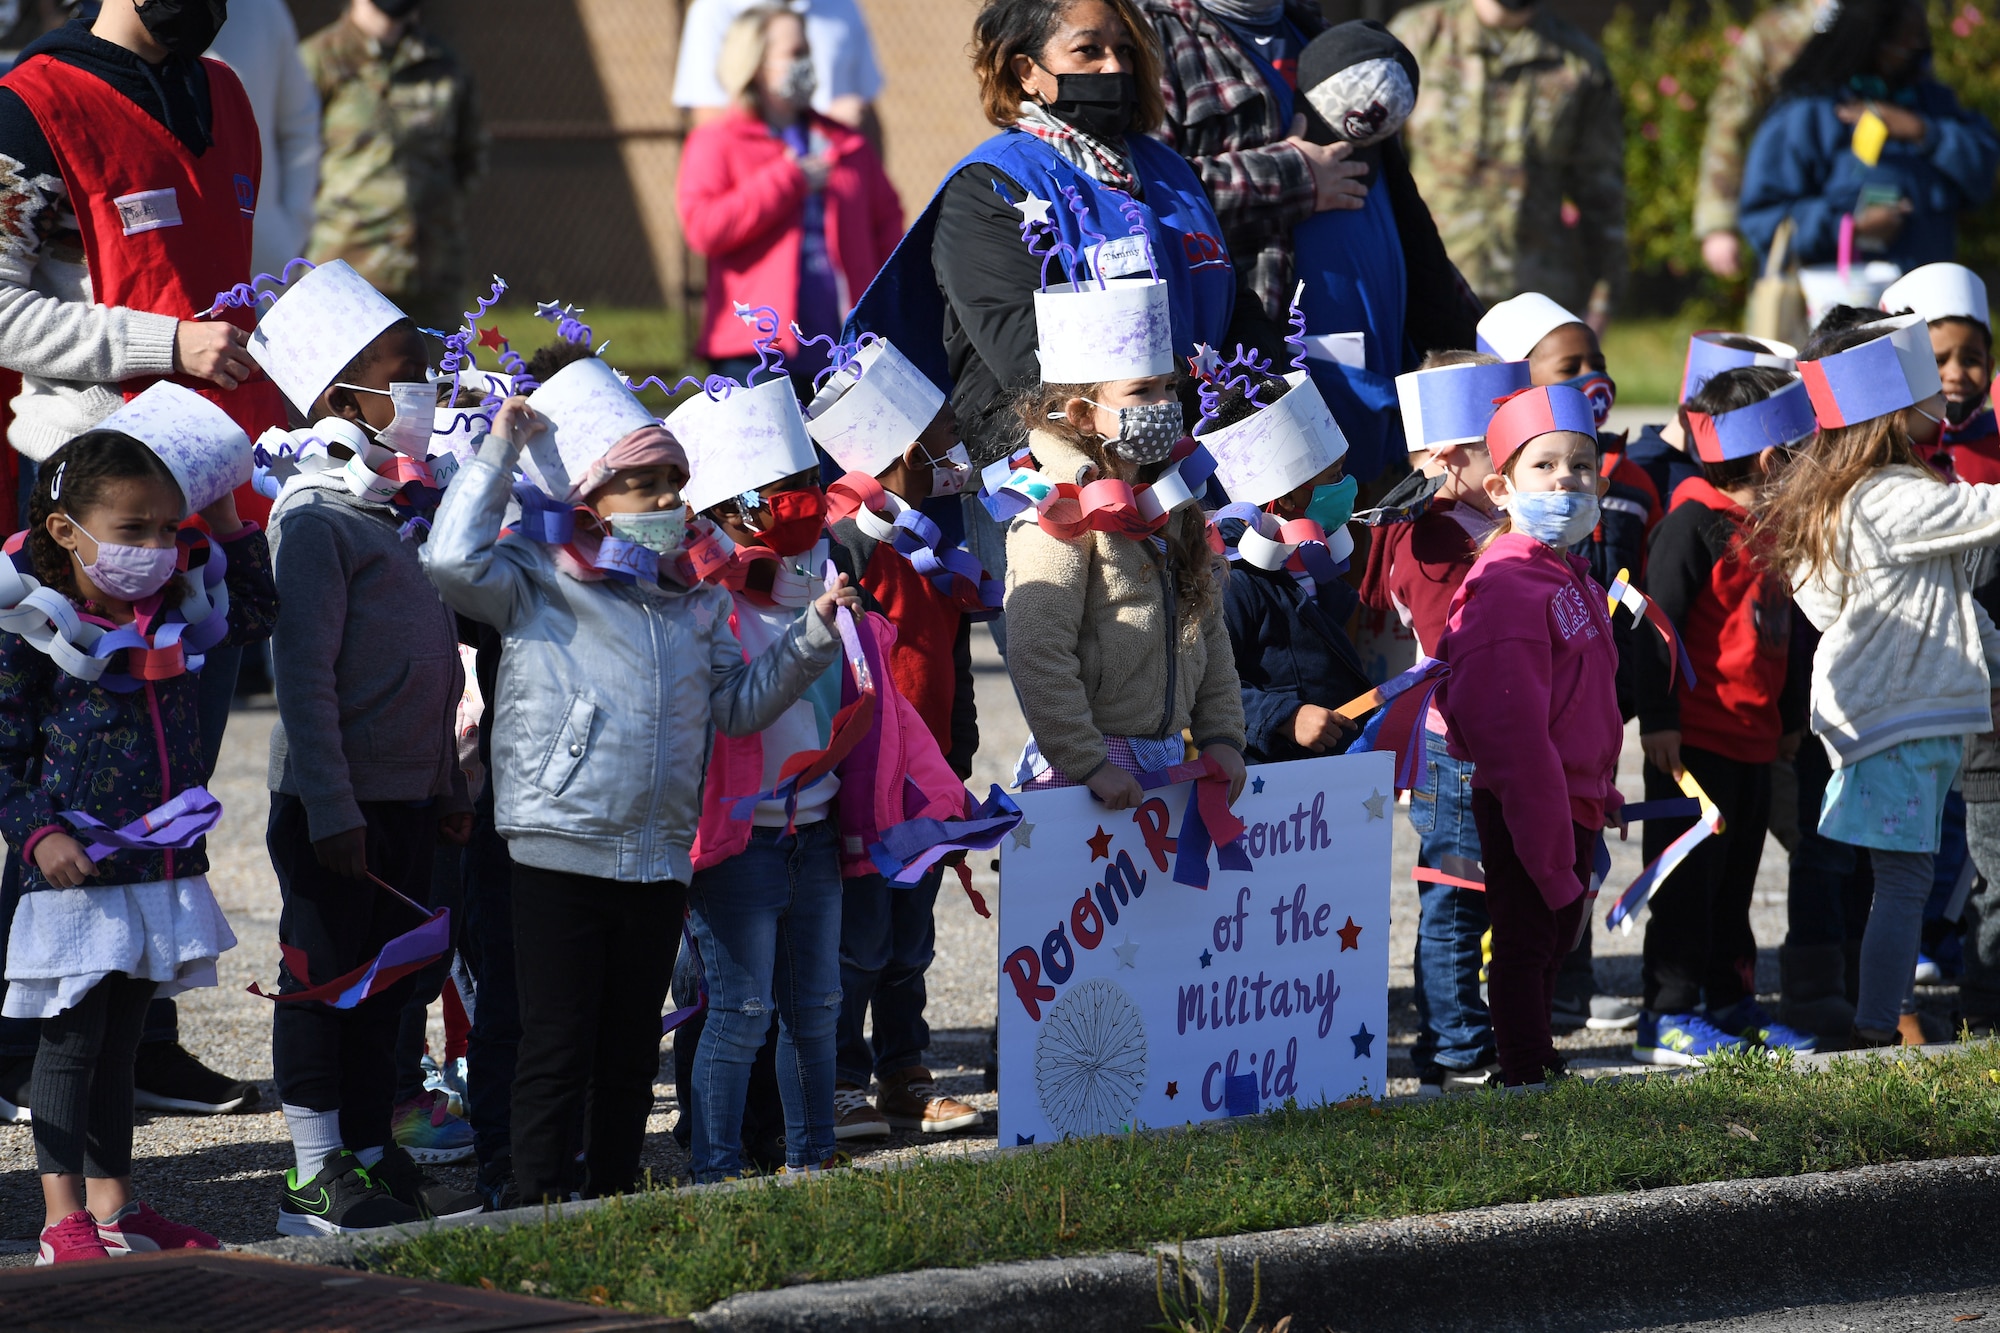 Children of Keesler personnel gather during a parade in front of the child development center at Keesler Air Force Base, Mississippi, April 1, 2021. The event was held in celebration of the Month of the Military Child, which is recognized throughout the month of April. (U.S. Air Force photo by Kemberly Groue)